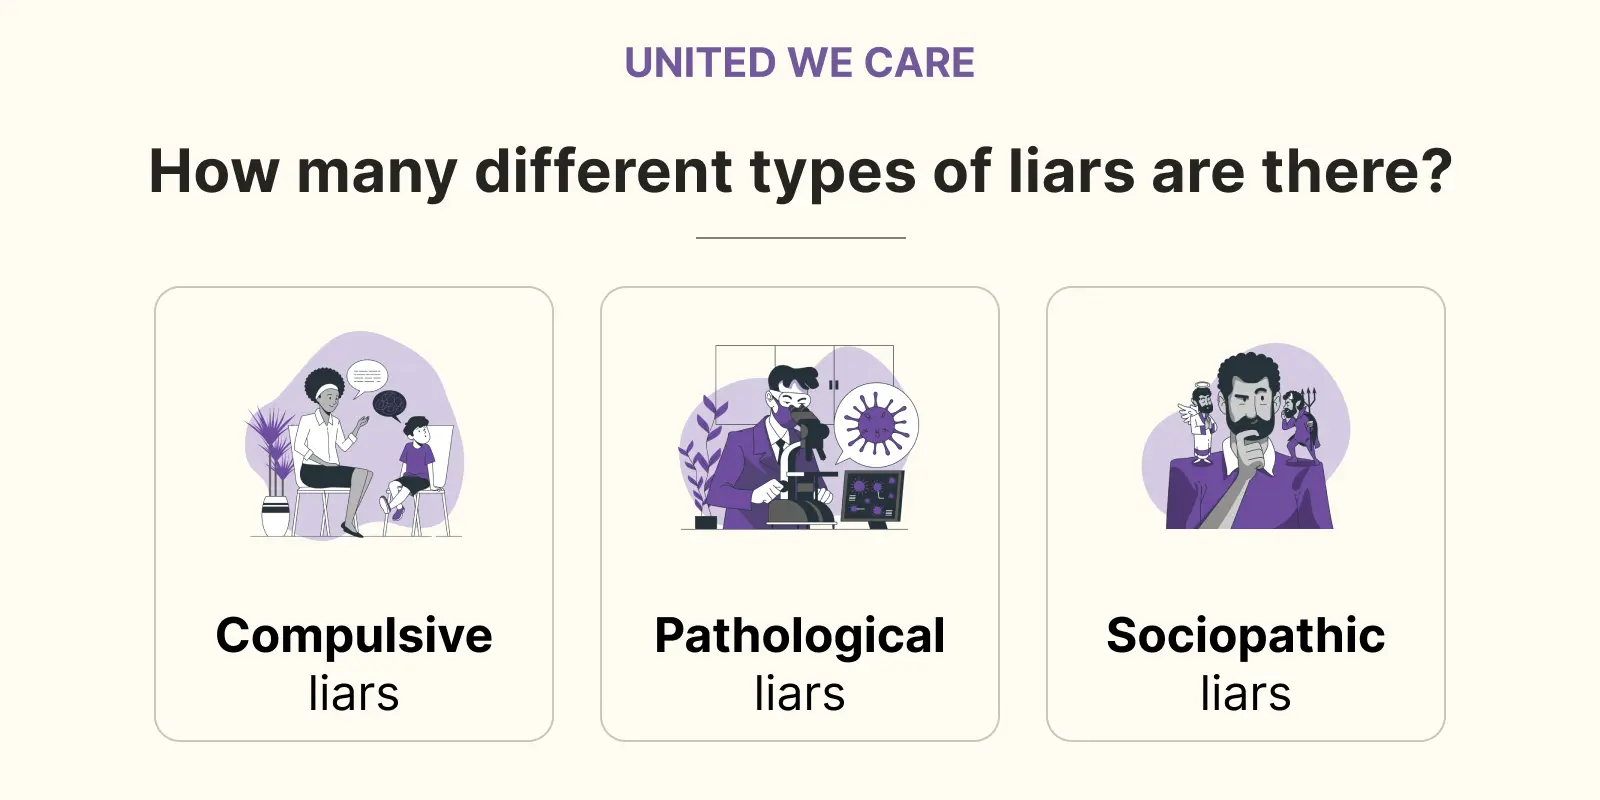 How many different types of liars are there?